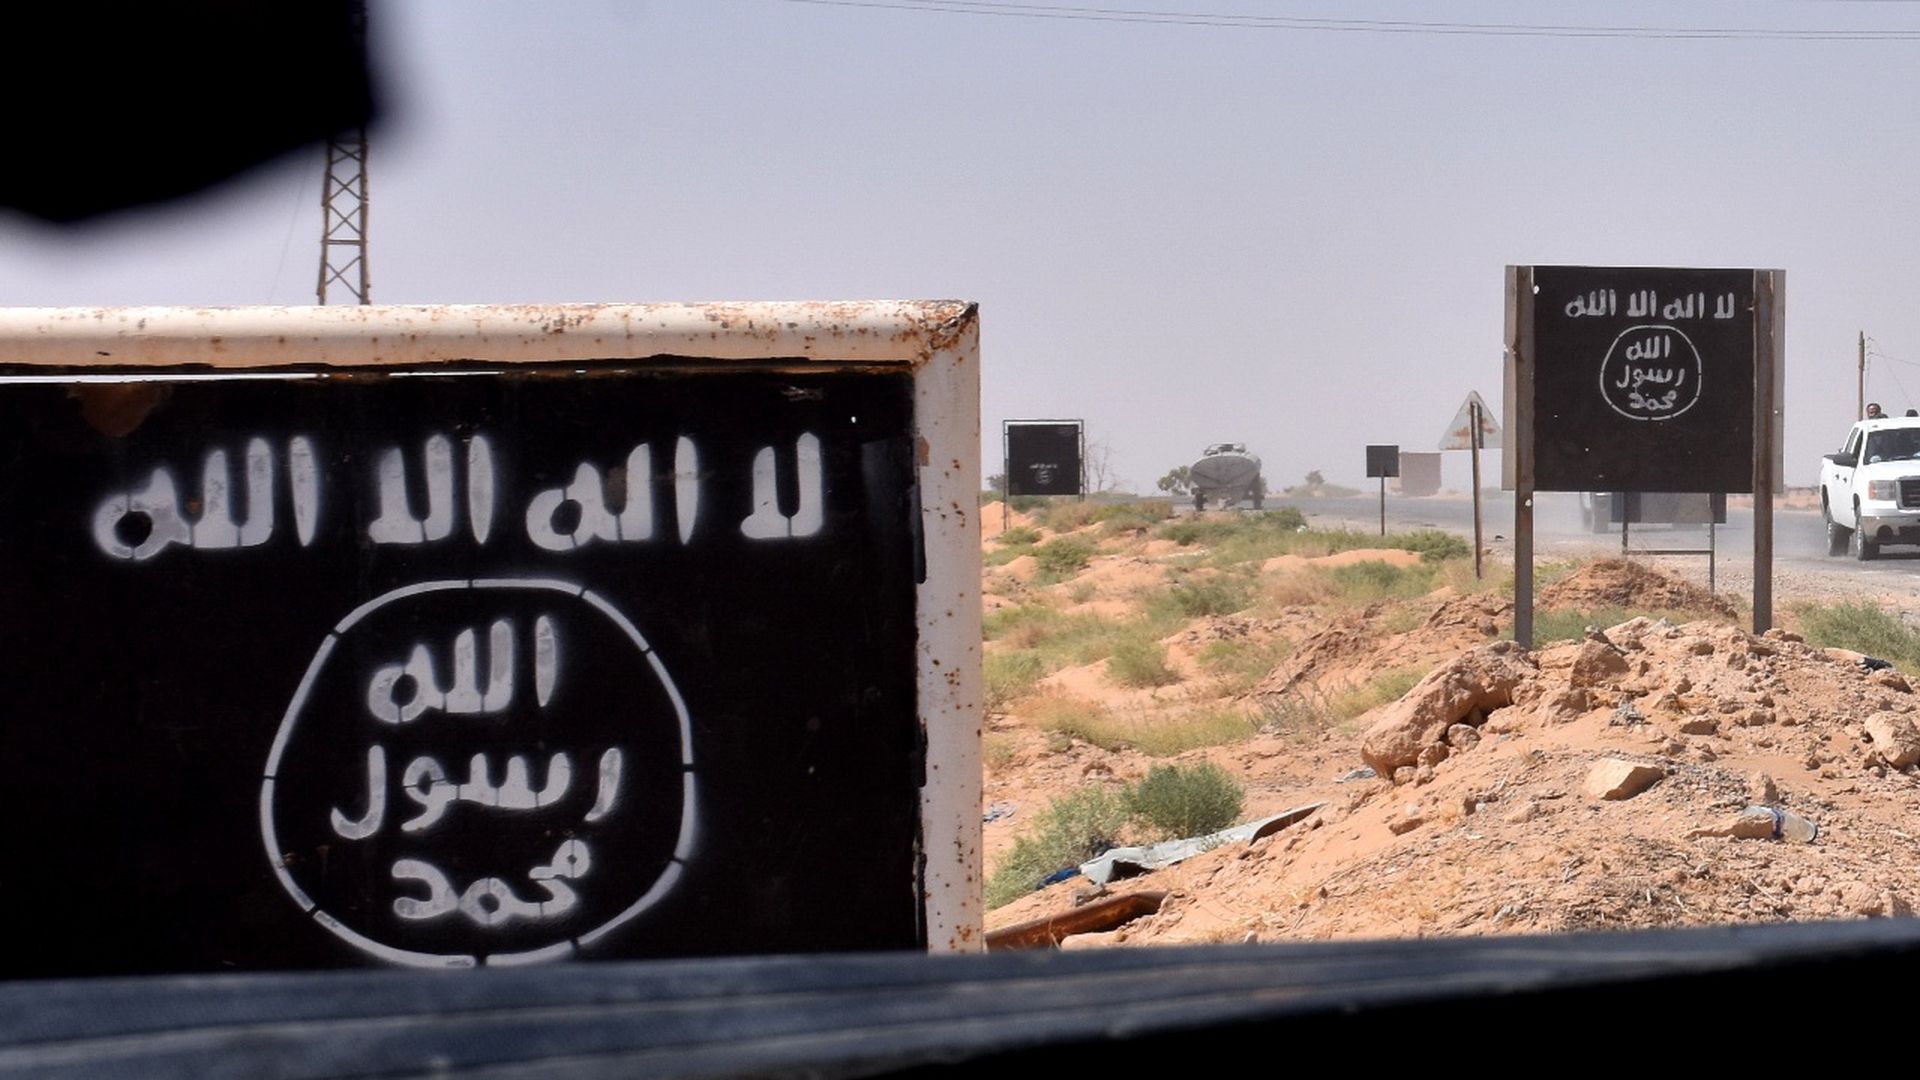 Billboards in northern Syria showing the ISIS logo in 2017